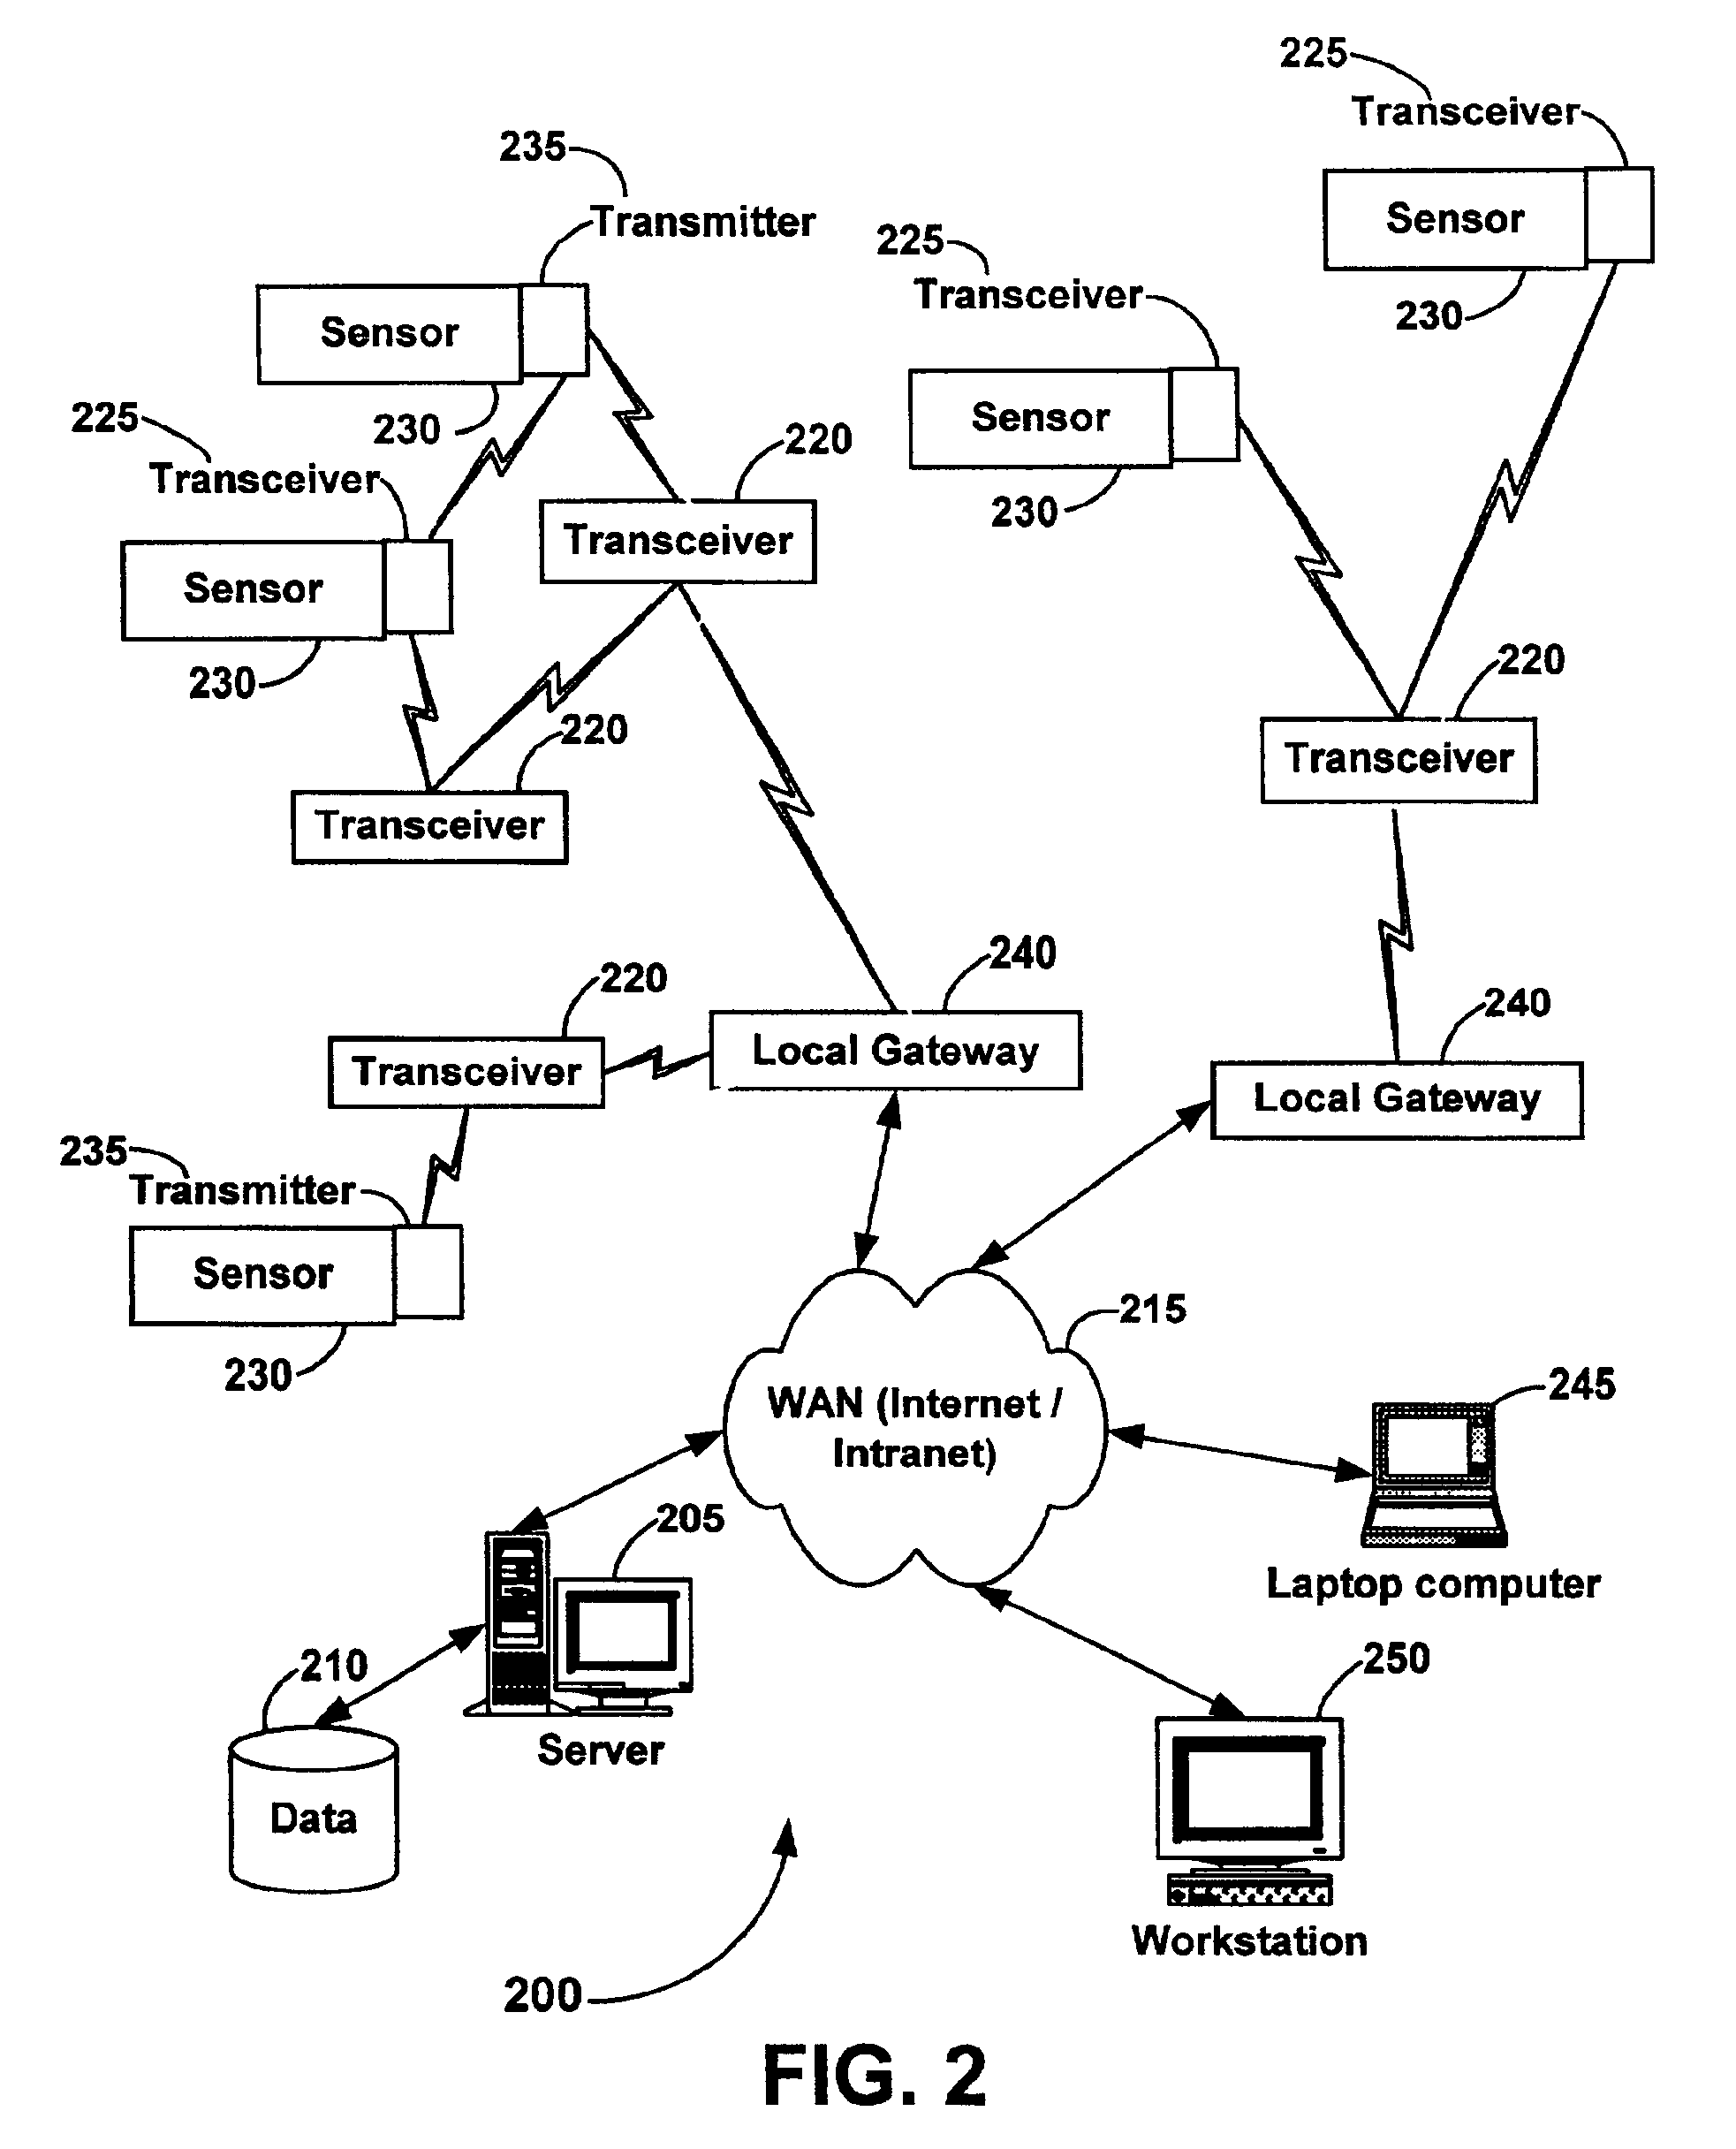 System and method for accessing residential monitoring devices